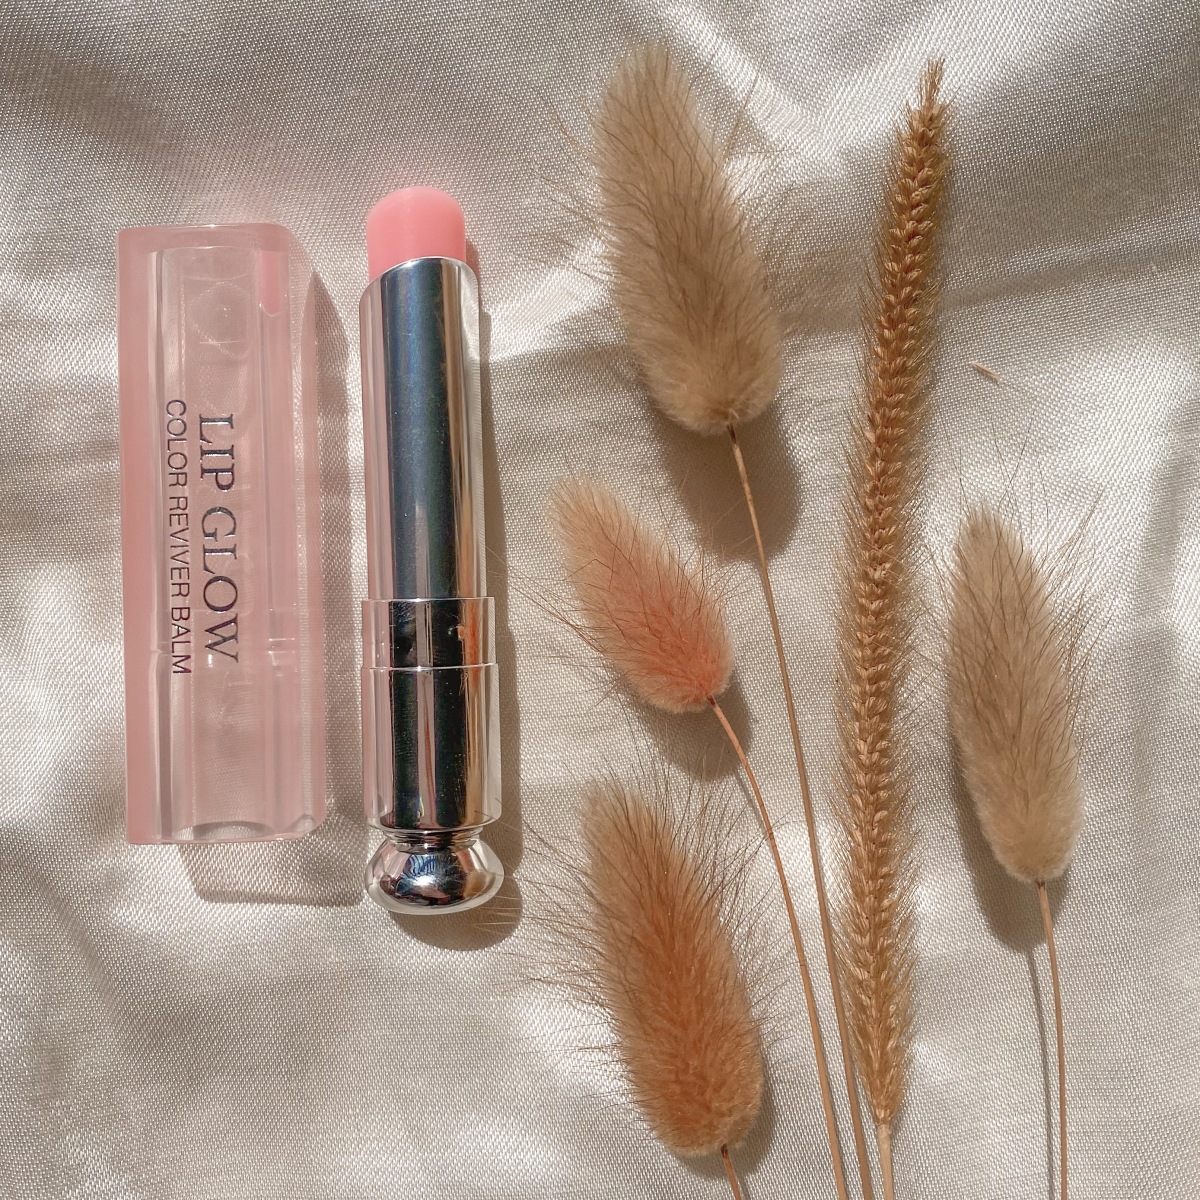 An honest review of the Dior Addict Lip Glow Balm